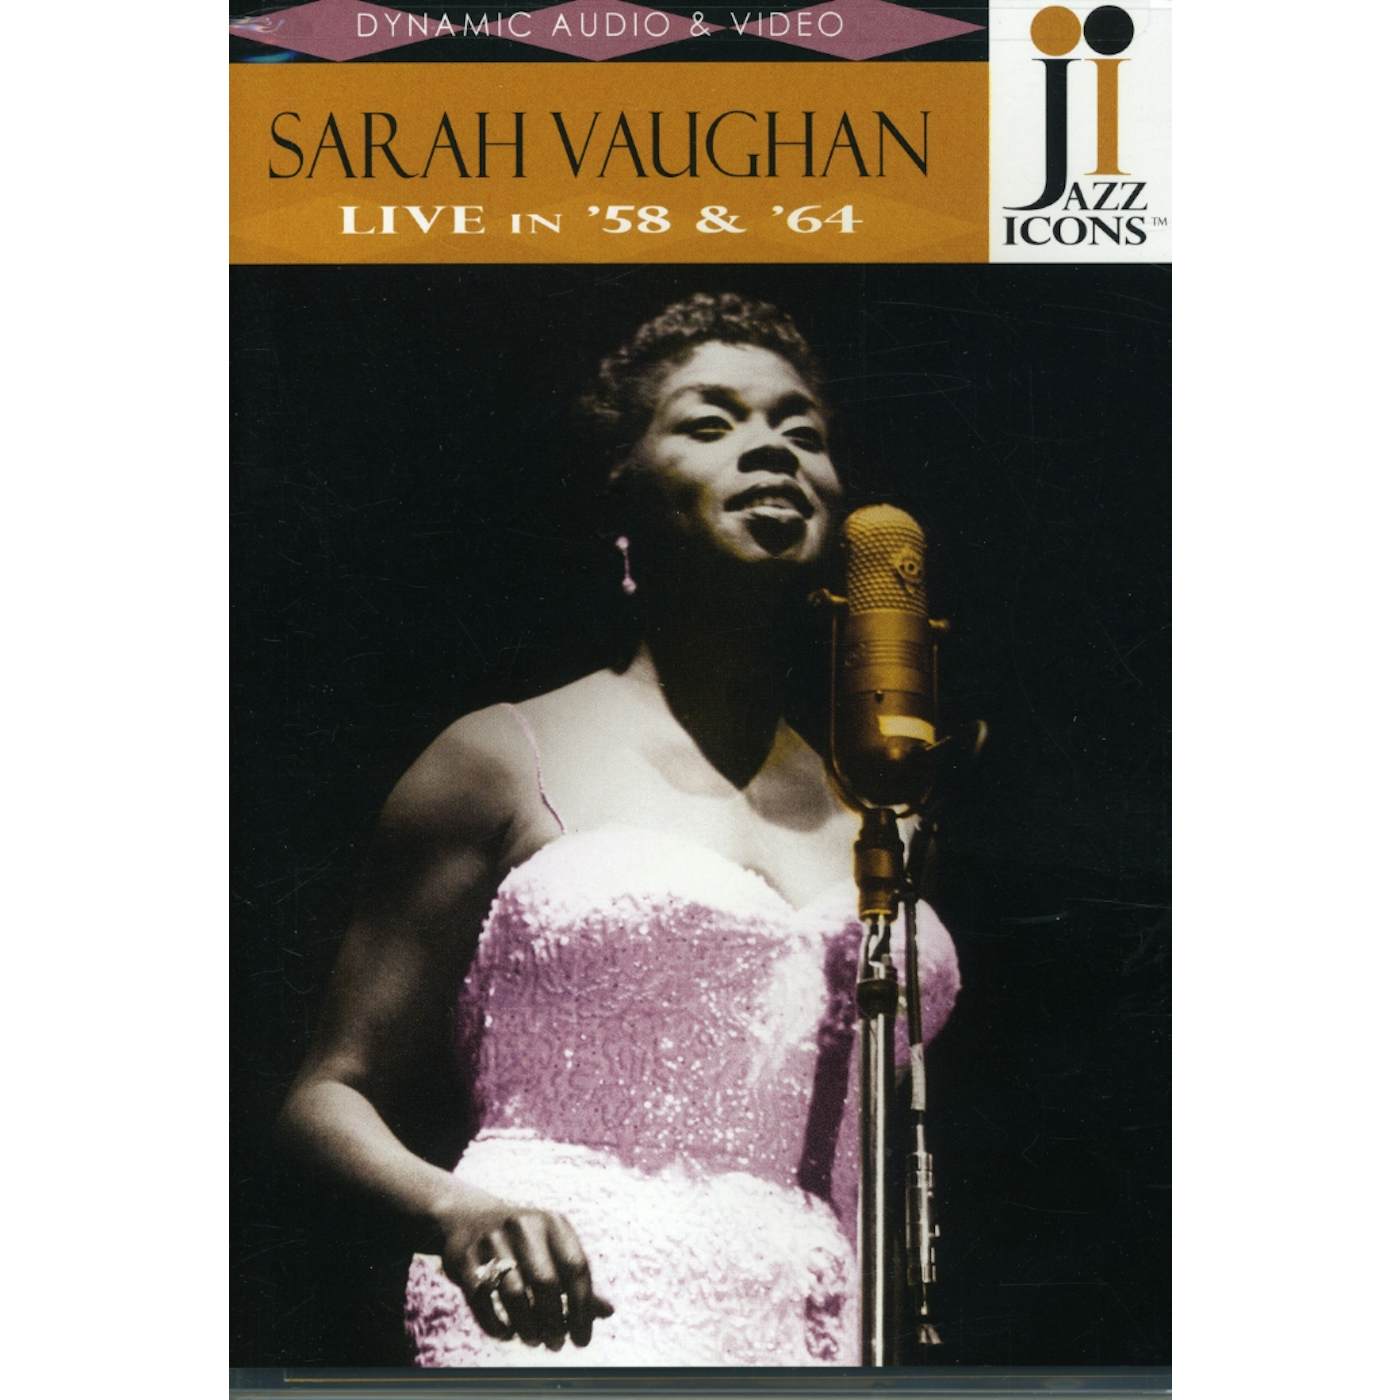 JAZZ ICONS: SARAH VAUGHAN LIVE IN 58 & 64 DVD